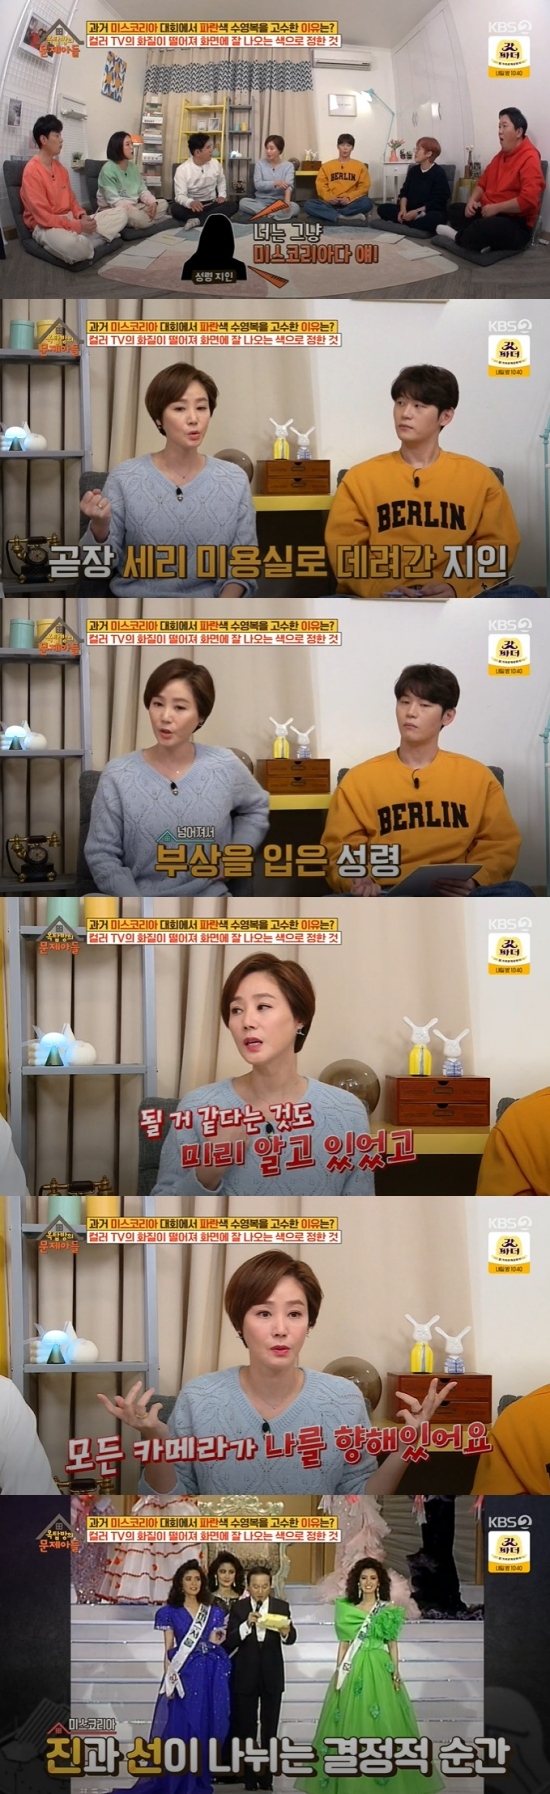 On KBS 2TV Problem Child in House broadcasted on the 16th, Kim Sung-ryung and Hak-ju Lee appeared as guests.Kim Sook told Hak-ju Lee, As a person who has been watching The World of the Couple hard, it was really bad.I did not eat a lot of insults, said Hak-ju Lee, I did, I eat a lot on the Internet.Kim Yong-man said, Is not it good to act when you are swearing? And Hak-ju Lee said, I thought that later. Good. (Many comments) I hate to see him.Its not good to see it, he said.Song Eun-yi wondered, Did you play a lot of villains? And Hak-ju Lee said, Its not that. I think there is something that worked well when I played villains.In addition, Hak-ju Lee said, I had a chemistry teacher in high school and I contacted him to polish.Until this time, your appearance in high school seems to be a lie, and this is really confusing.Kim Sook admired I was a model student, and Hak-ju Lee said, I felt like I was the first to say that my birthday was the same as my teacher and me.I was a little close then, Kim Sook said. How many are the best or the best? And Hak-ju Lee confessed, I am second in the class.Kim Sung-ryung said, (Hak-ju Lee) had a lot of female fans, and this story was really much done while filming.I have a lot of fans around me, he praised, and Min Kyung-hoon said, I can introduce you and I do not think so. Im uncomfortable with that, said Hak-ju Lee, who was a stranger.In particular, Kim Sung-ryung said the reporter was a dream, and (the acquaintance) said, What reporter is it, you are Miss Korea, so I took him to the saliment room.As soon as he saw it, he took out the blue Sooyoung suit and asked him to try it on as soon as he saw it. Kim Sung-ryung said: I was badly injured the day before Miss Korea tournament, I fell from my chair and was bleeding from a side injury.I did not even get my back on the day of the tournament, but I went out with painkillers and something like this. I was dizzy.Kim Sung-ryung said: The staff came to me and changed Earring and cared more, and when I was on stage and there were really two people left, I was like, I am?All the cameras were directed at me, and it was like, Oh, my God. Nevertheless, I should have cried, but I was too distracted. Photo = KBS Broadcasting Screen